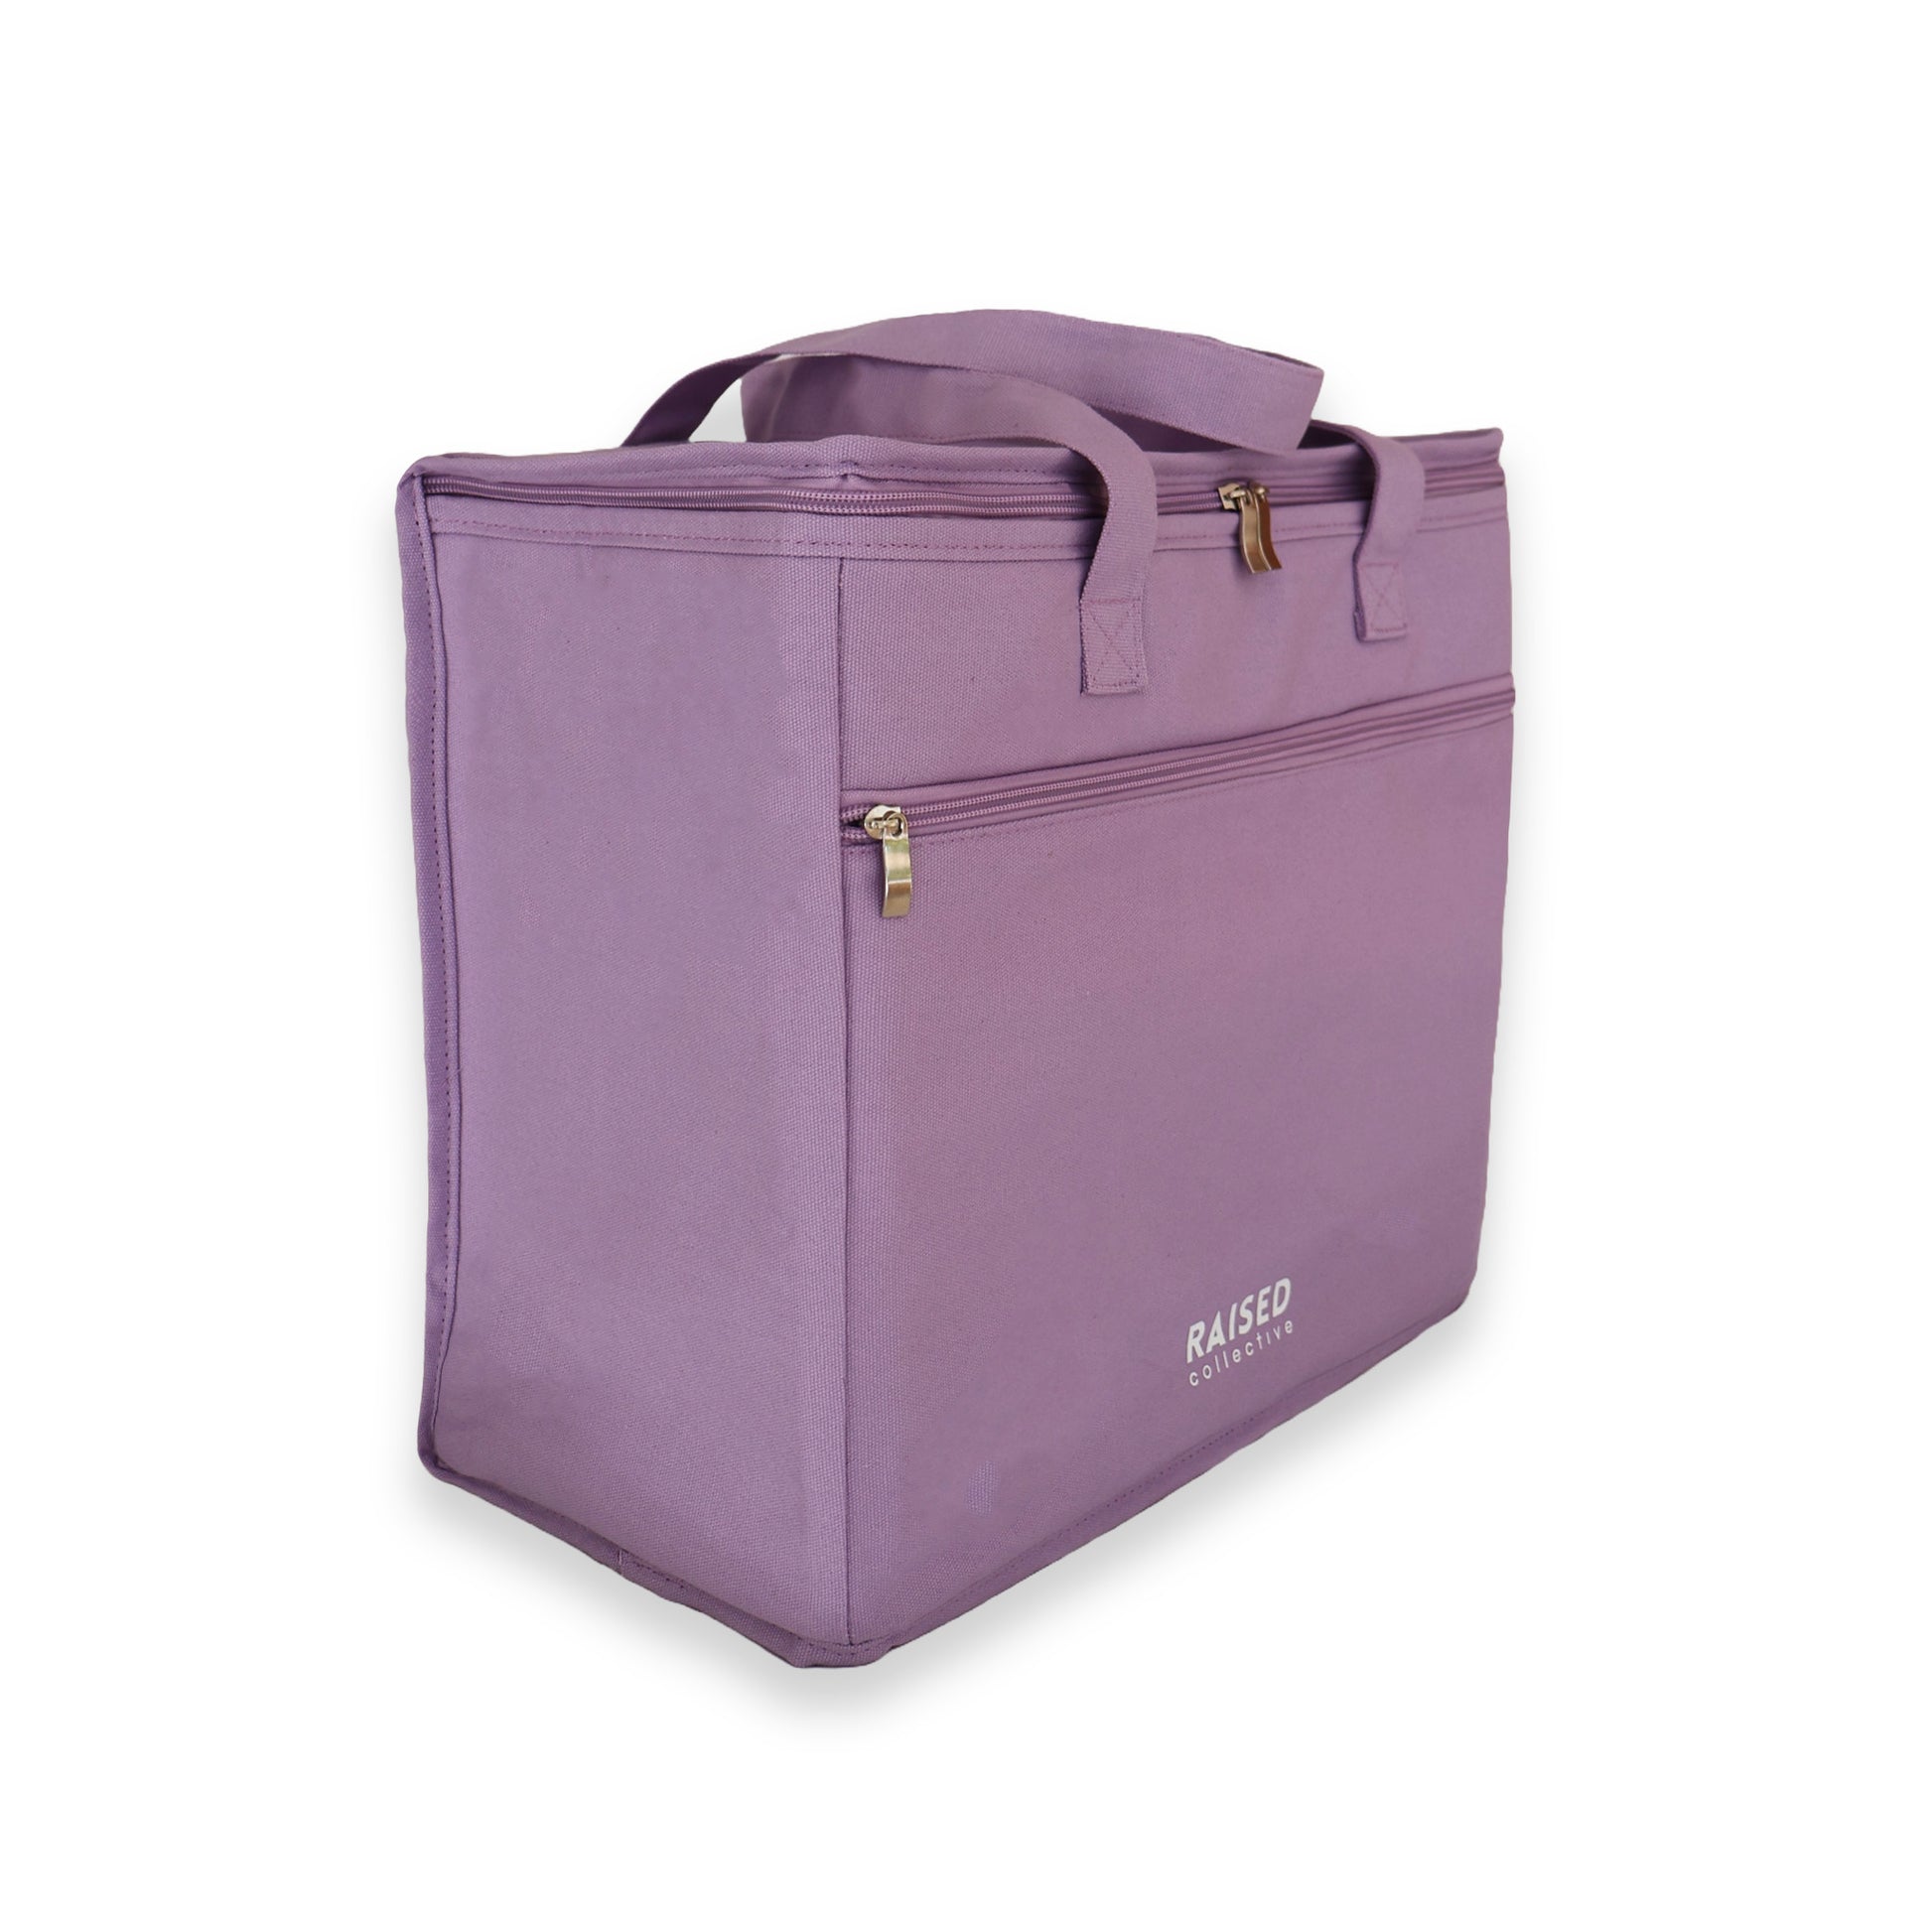 Side view of the picnic cooler bag in lilac, large main insulated compartment and smaller front zippered compartment for keys, wallet and phone.  For beach and picnic days, buy well and buy once.